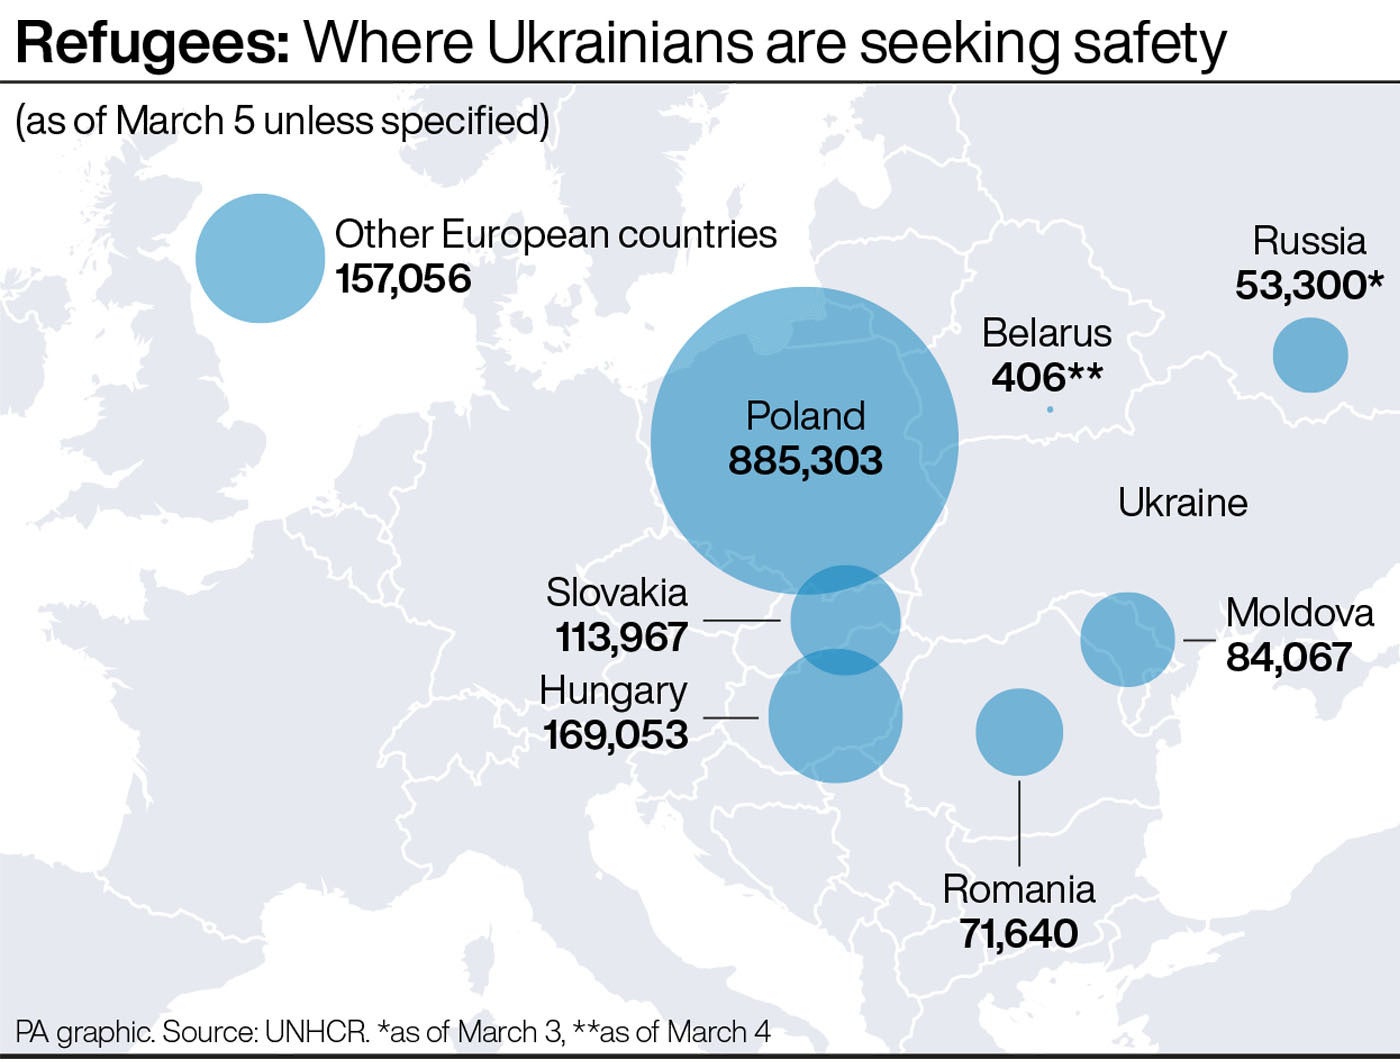 This graphic shows the countries Ukrainian refugees are fleeing to